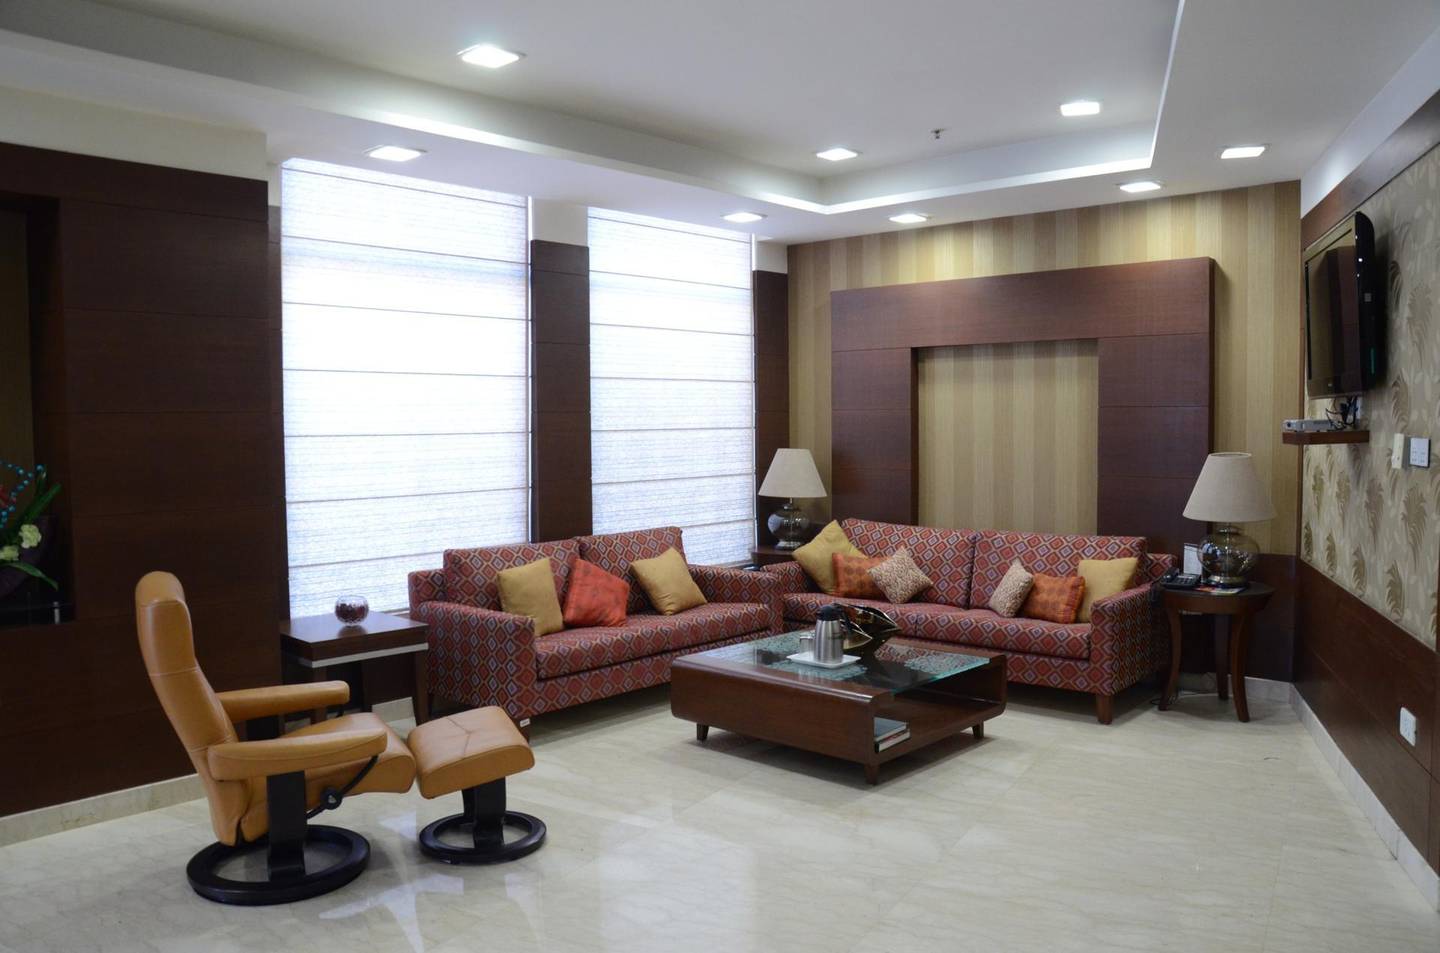 A reception room at Fortis Healthare, India. Courtesy Fortis Healthcare